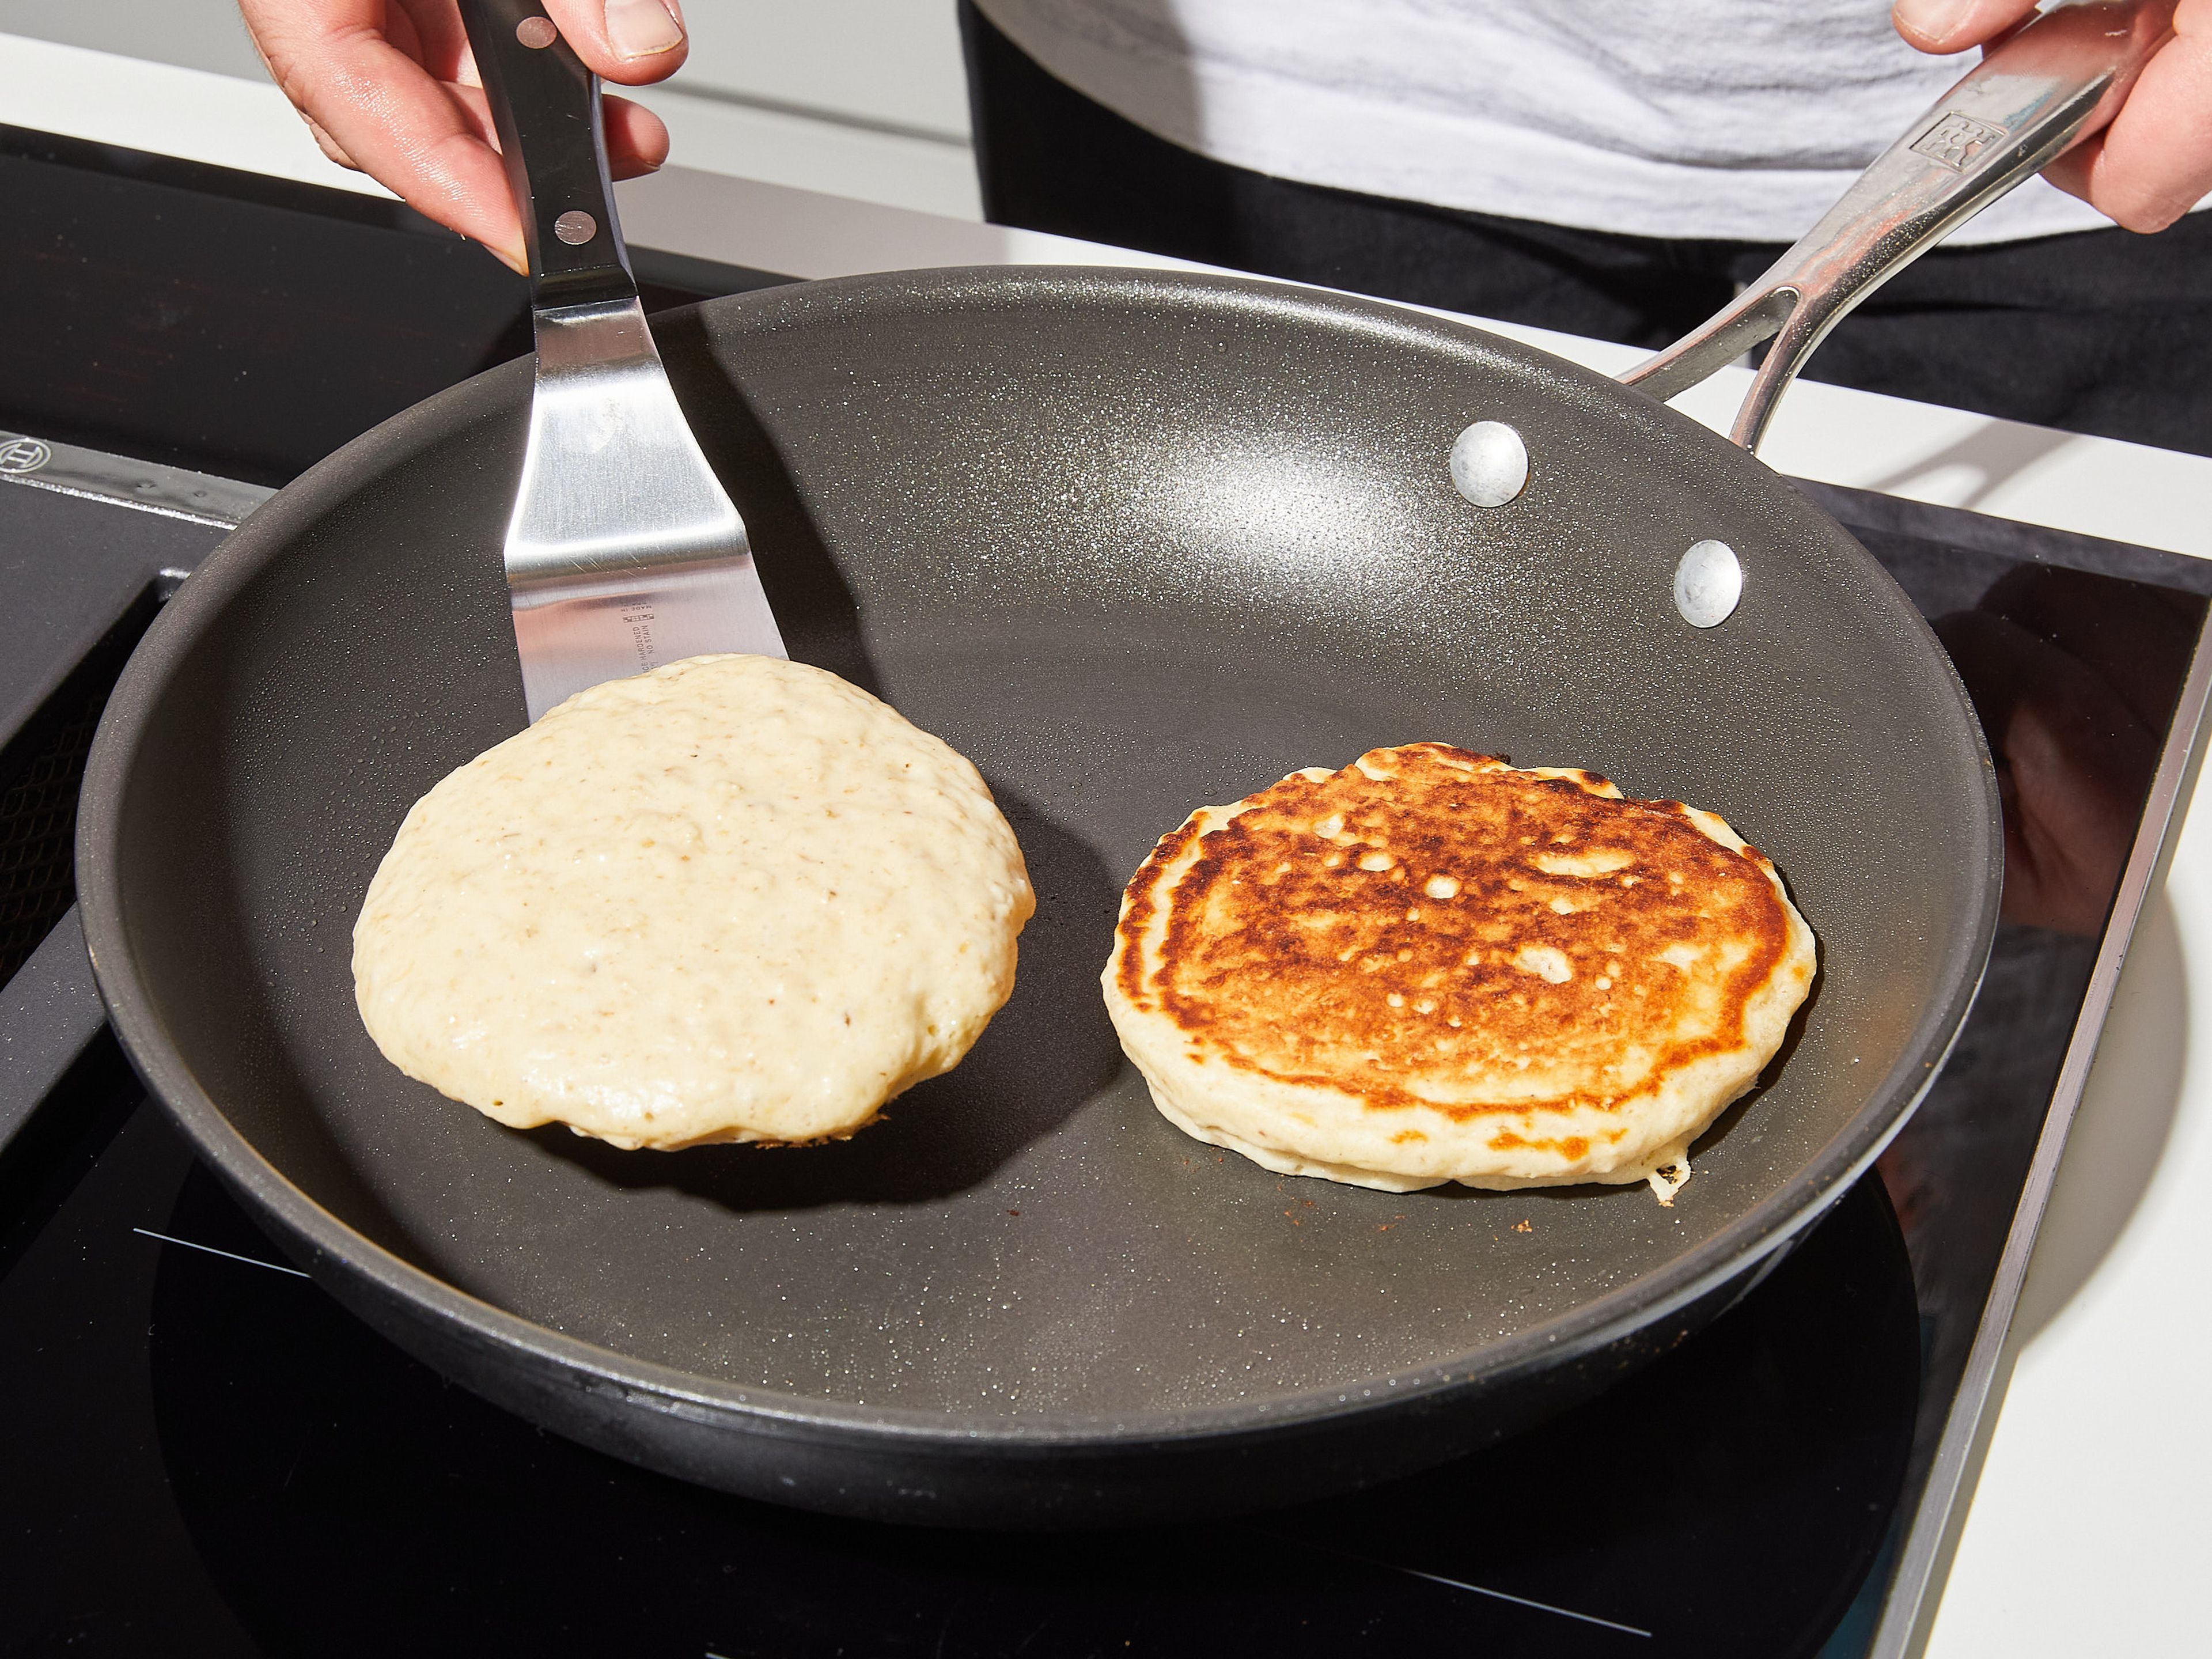 In the previously used nonstick frying pan, heat a little vegetable oil over medium heat. Add some batter to create pancakes approx. 10 cm/4 in. in diameter. Flip pancakes after approx. 2 – 3 min., or when they are golden brown on the bottom and bubbles appear all around the edges of the pancakes. Cook for approx. 2 min. on the other side, then remove and repeat until the batter is used up. Serve with the homemade strawberry sauce and the reserved fresh strawberries. Enjoy!